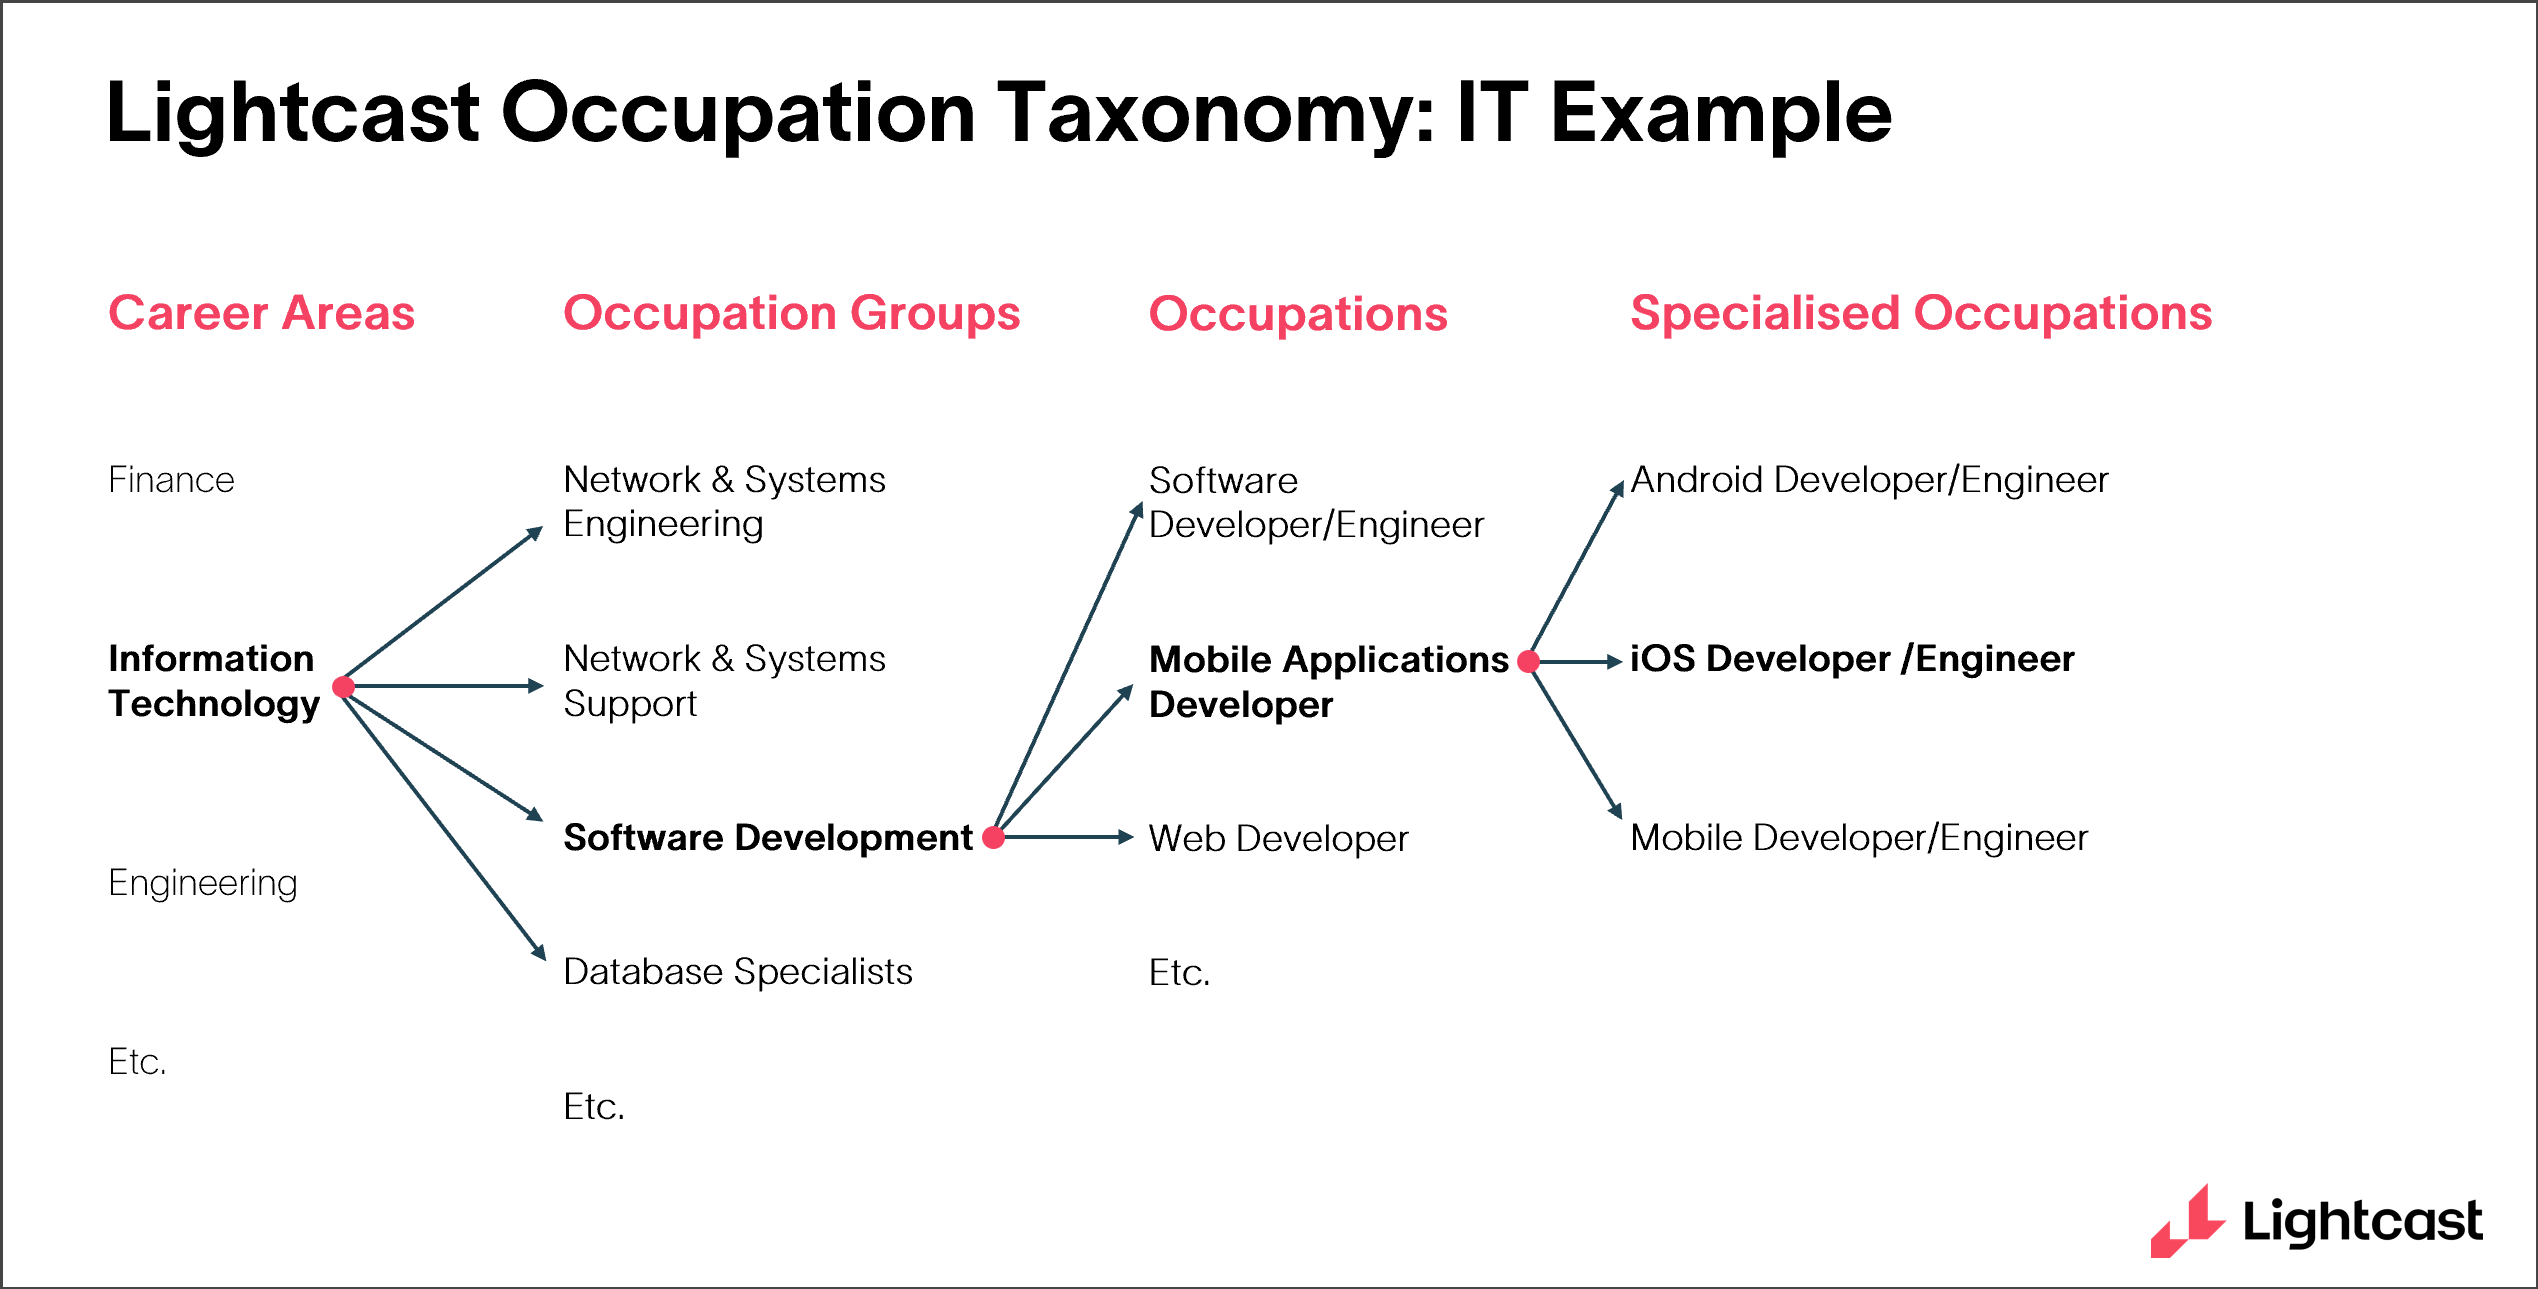 IT example of the Lightcast Occupation Taxonomy